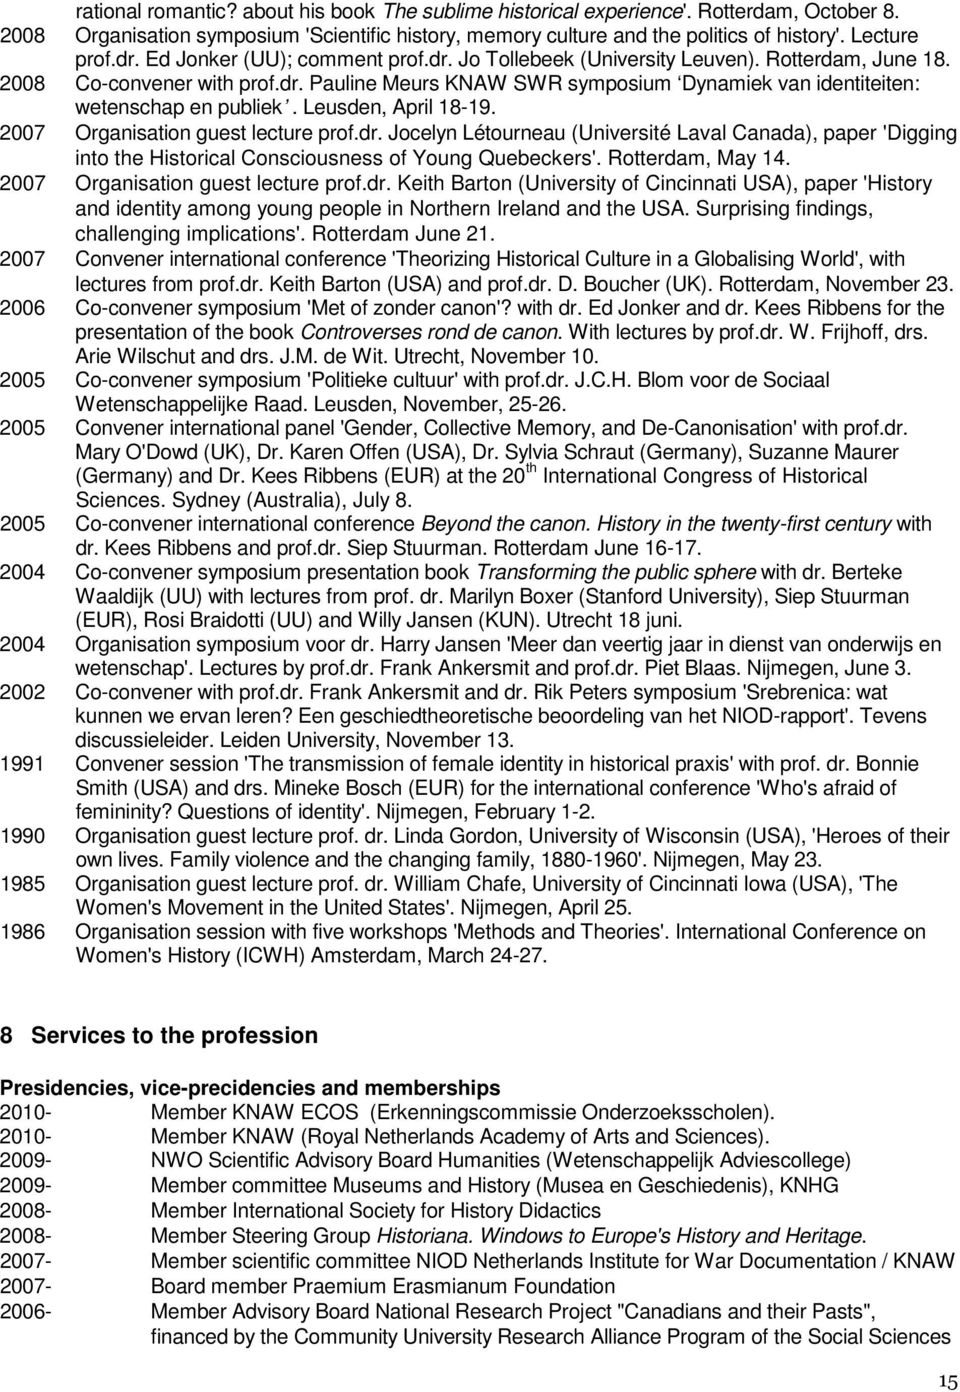 Leusden, April 18-19. 2007 Organisation guest lecture prof.dr. Jocelyn Létourneau (Université Laval Canada), paper 'Digging into the Historical Consciousness of Young Quebeckers'. Rotterdam, May 14.